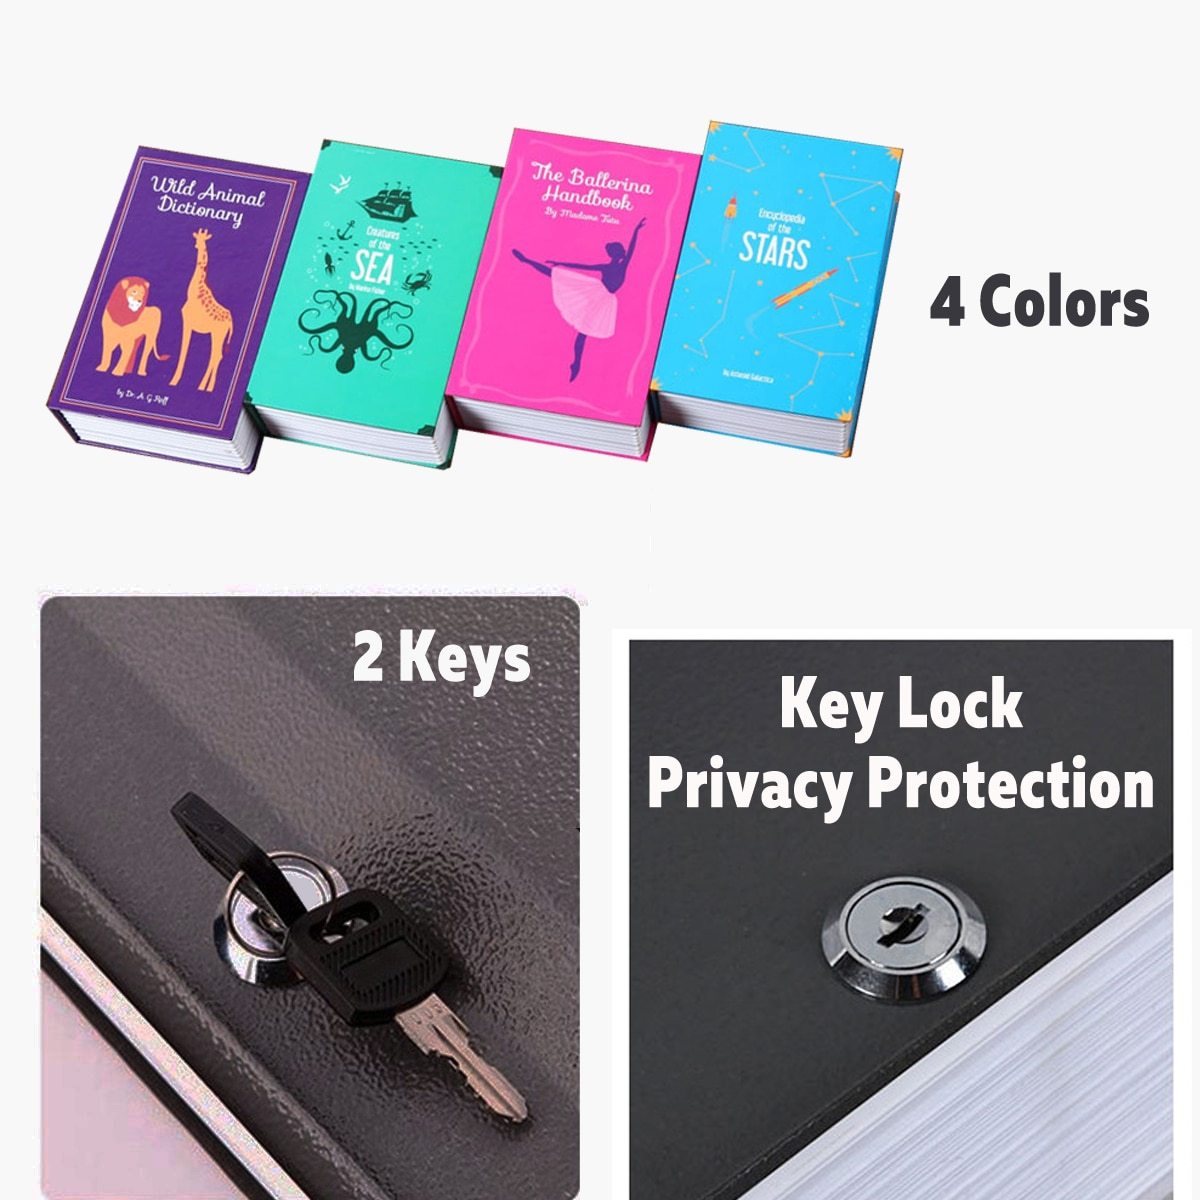 Metal Lock Hidden Book Safe Cut Out Book with Secret Compartment - Concealment Cans